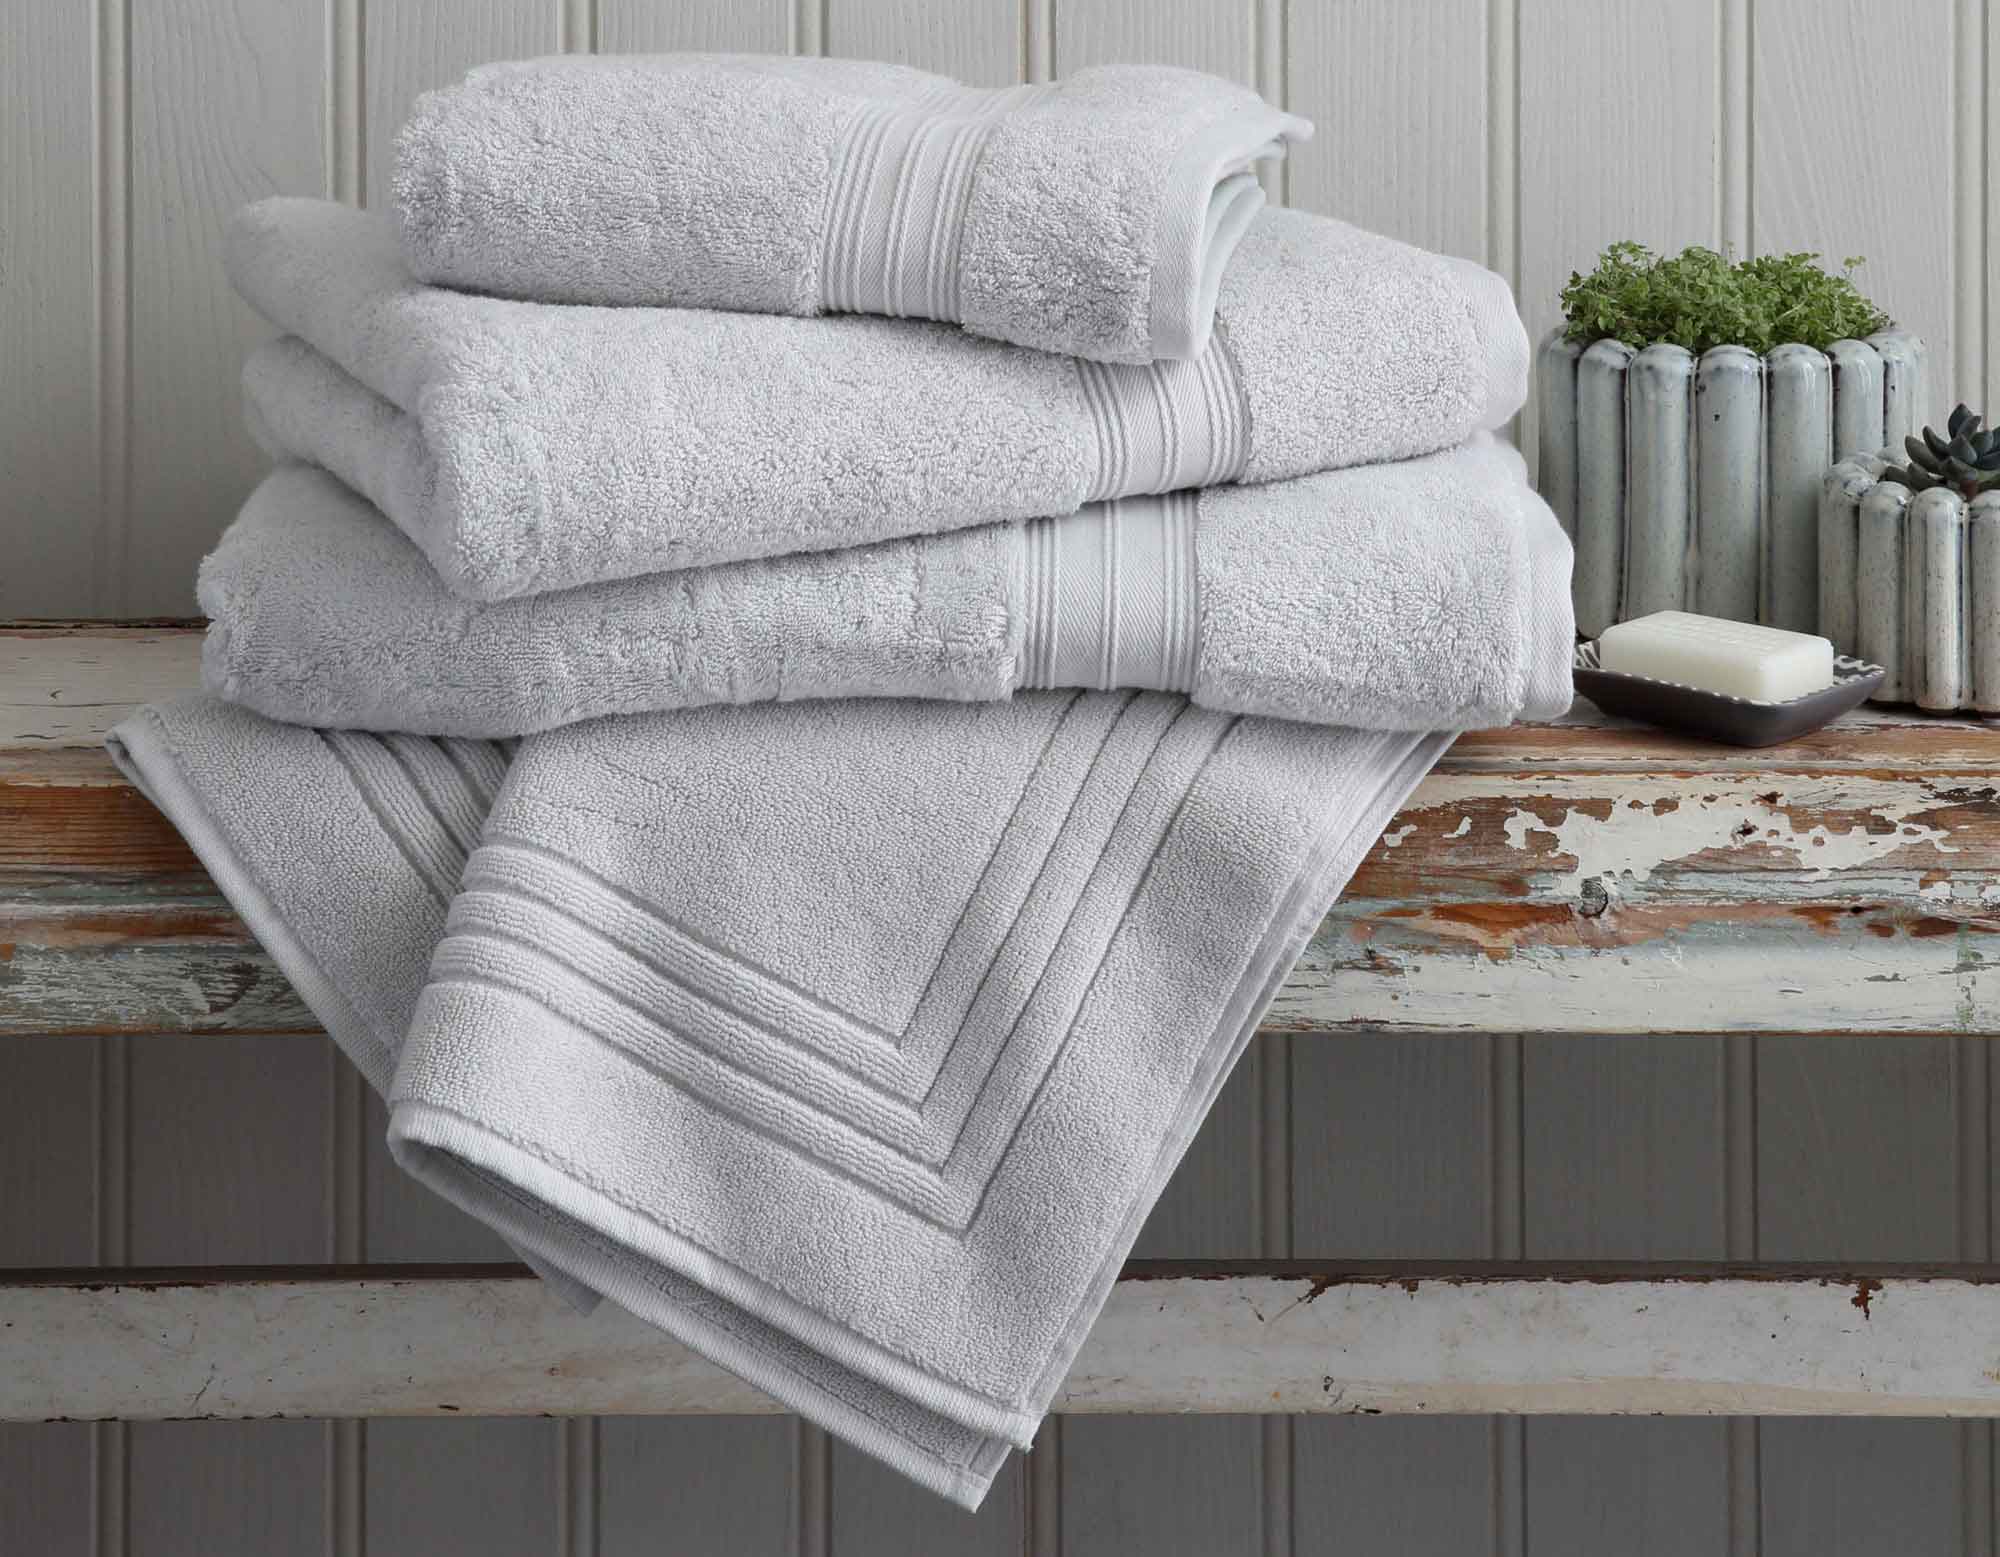 Bundle of pearl grey bath towels and bath mat on rustic bench with soap and grey vases